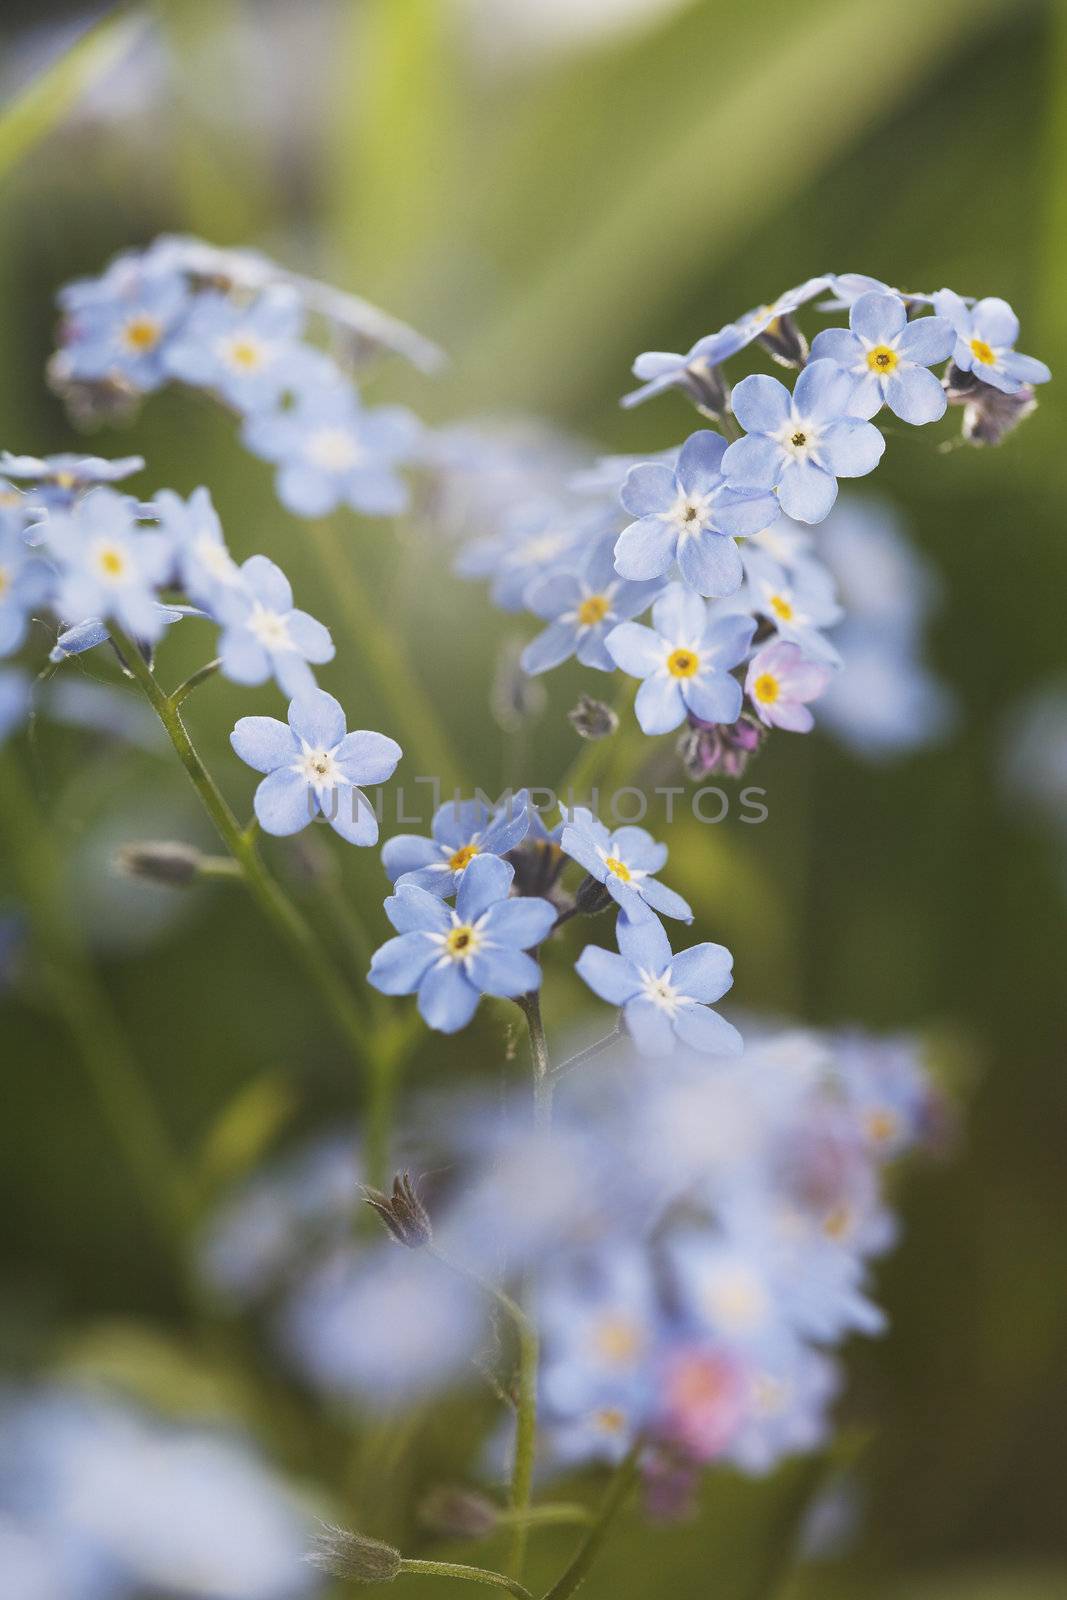 Forget-me-not by Stocksnapper